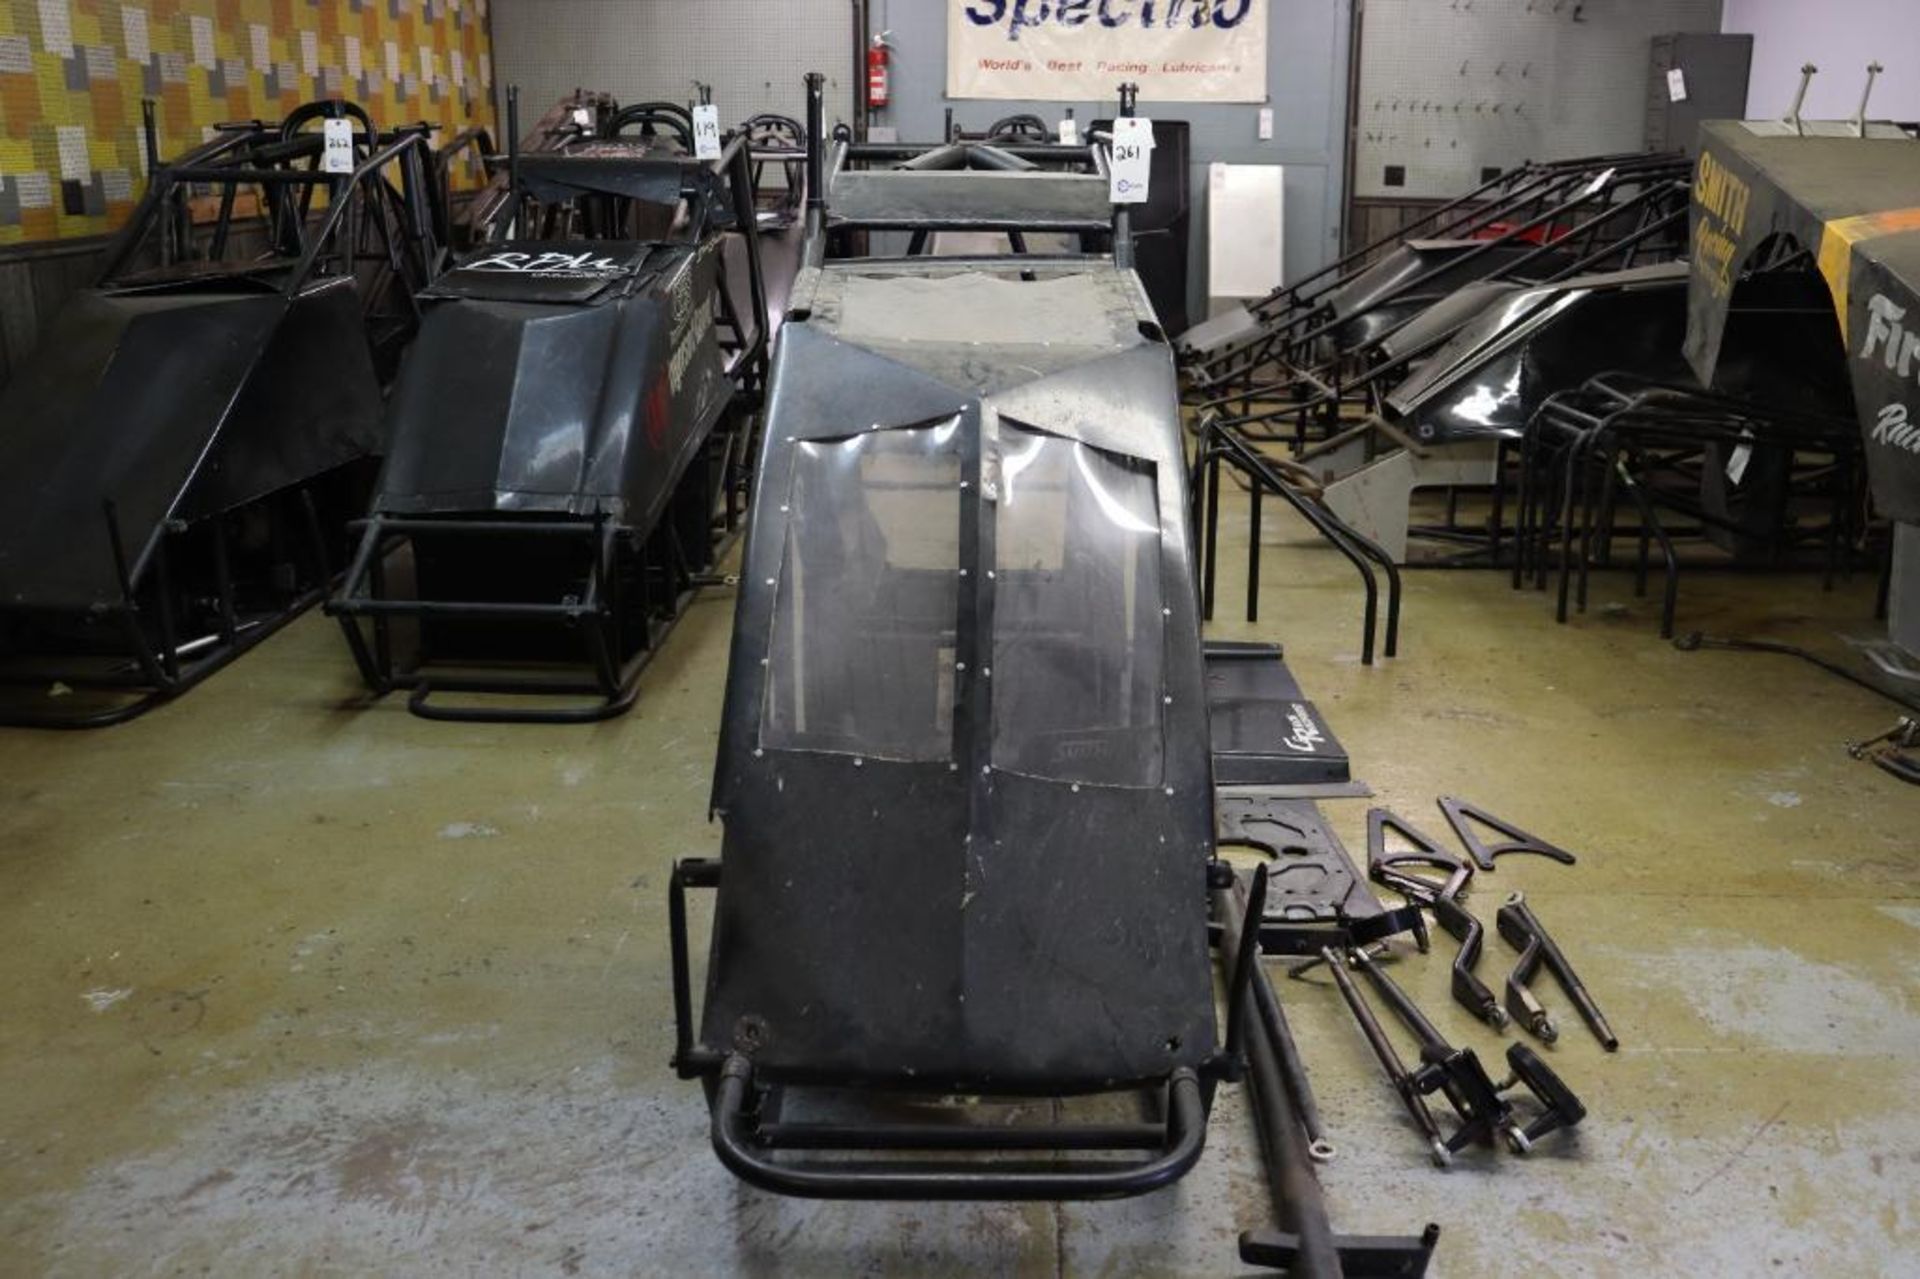 Smith Ingersoll-Rand sprint car w/ body panels & components - Image 3 of 13